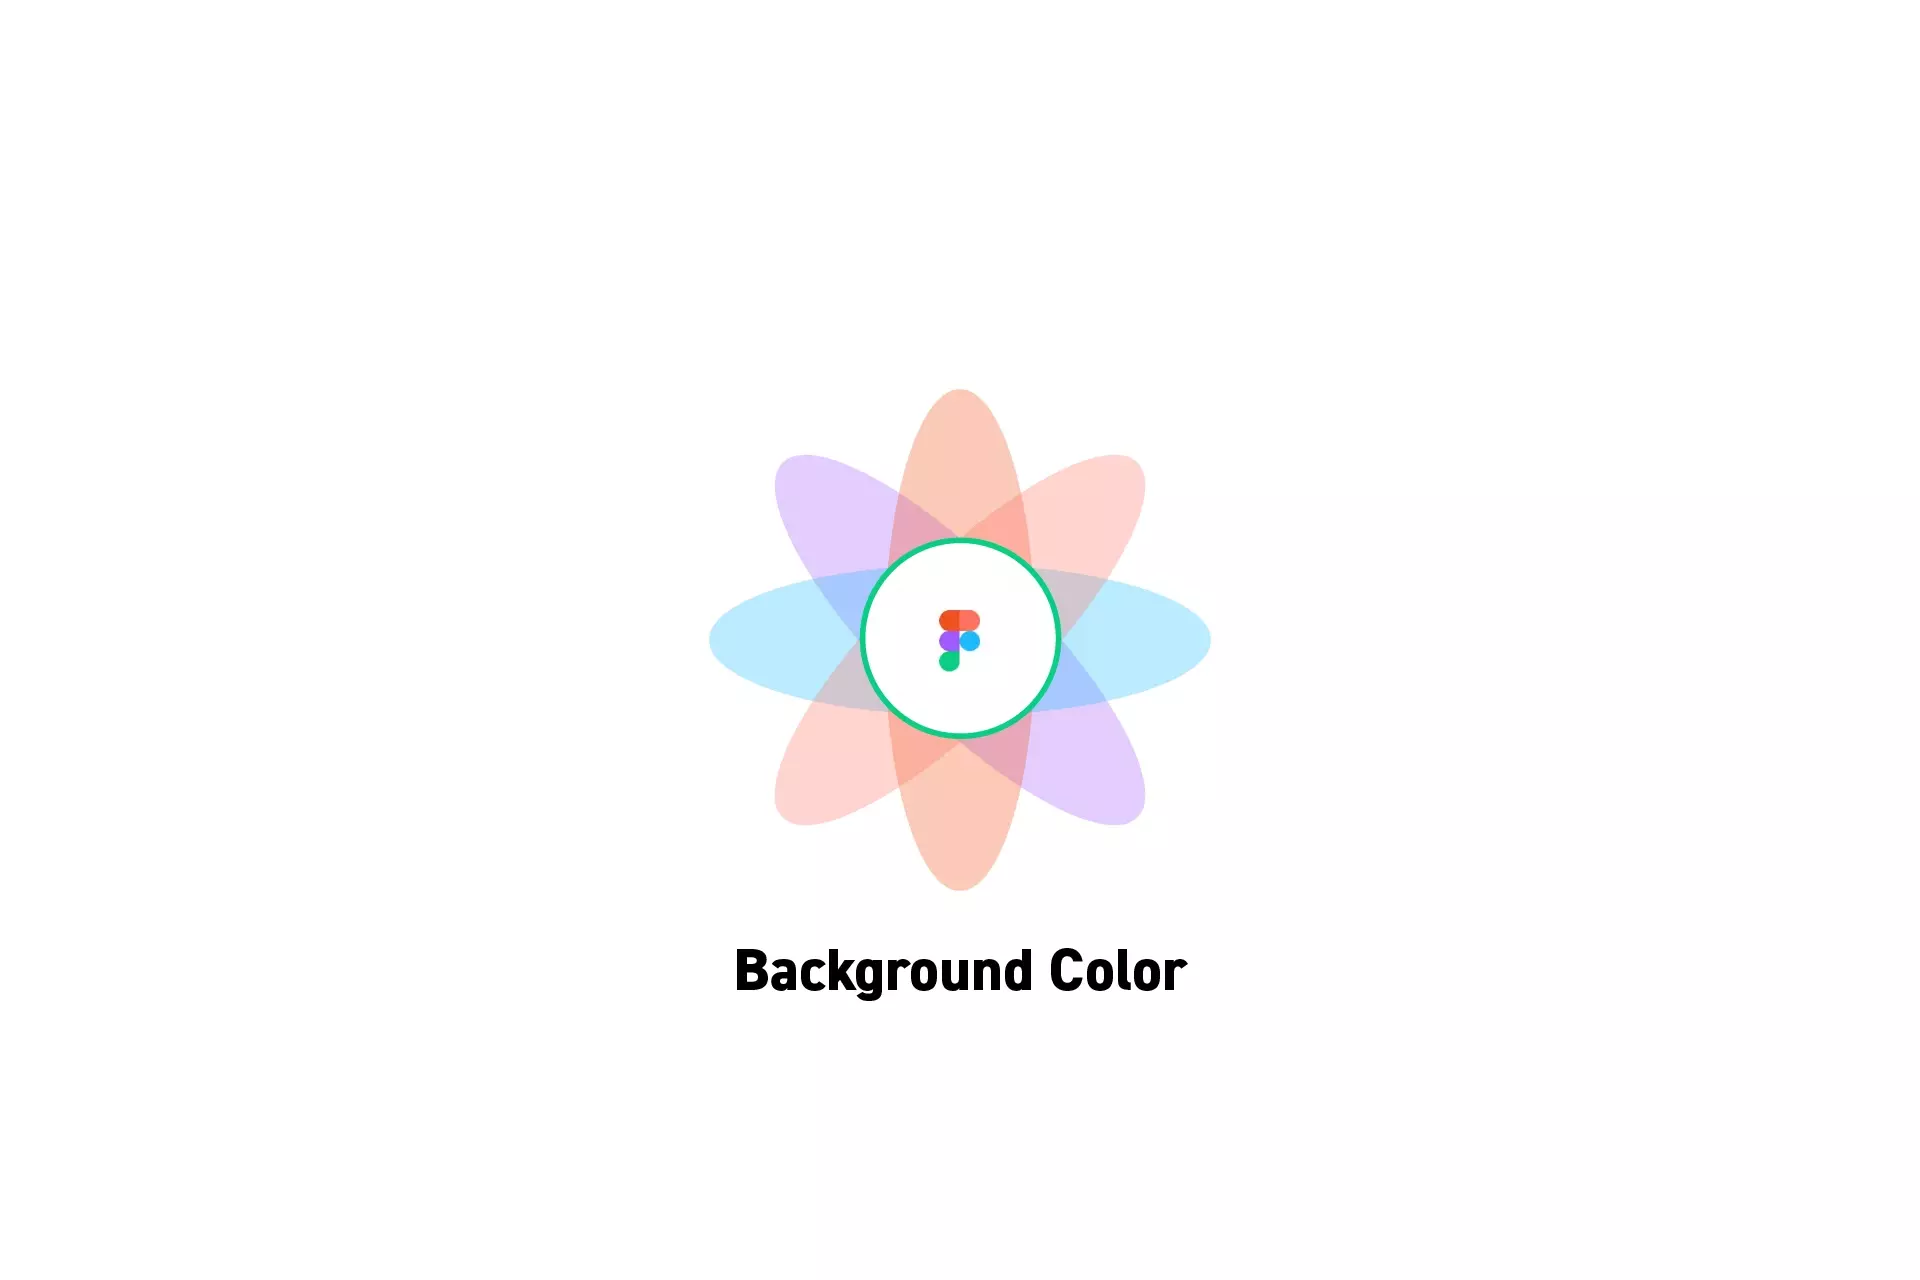 https://www.delasign.com/CDN/images/How-to-change-the-Background-Color-of-a-Frame-or-a-Shape-in-Figma.webp